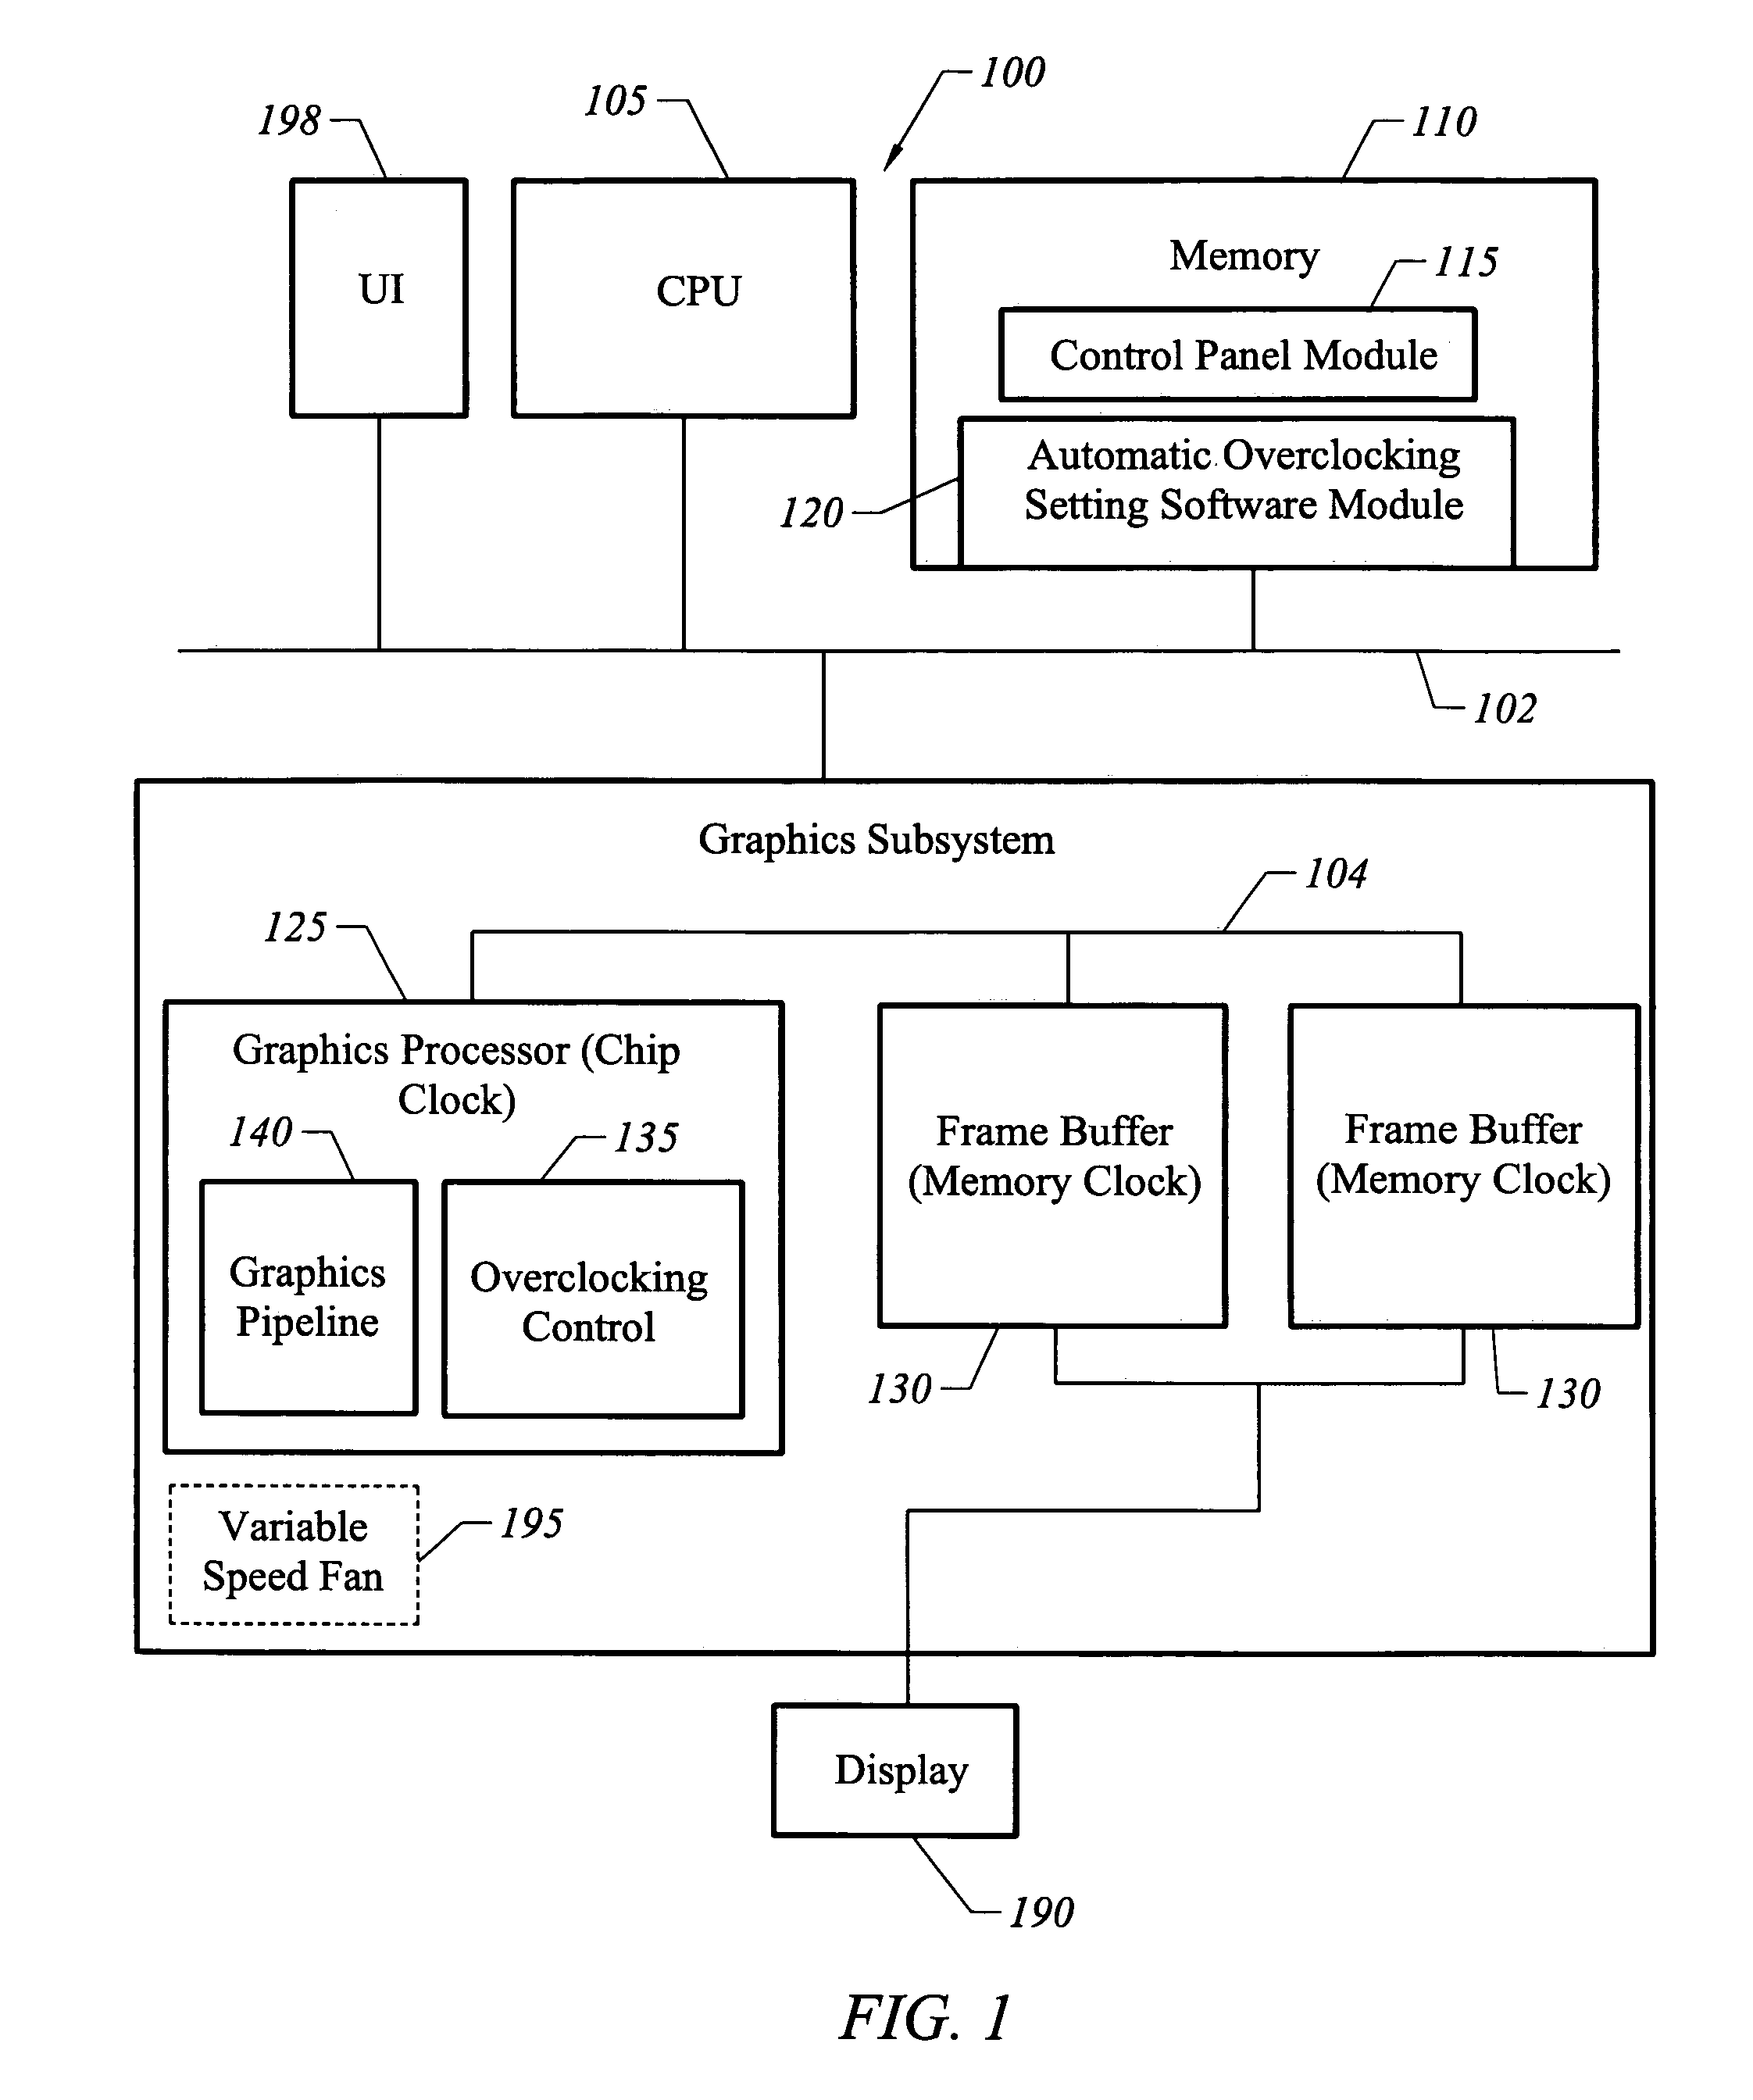 Method, apparatus, system, and graphical user interface for selecting overclocking parameters of a graphics system